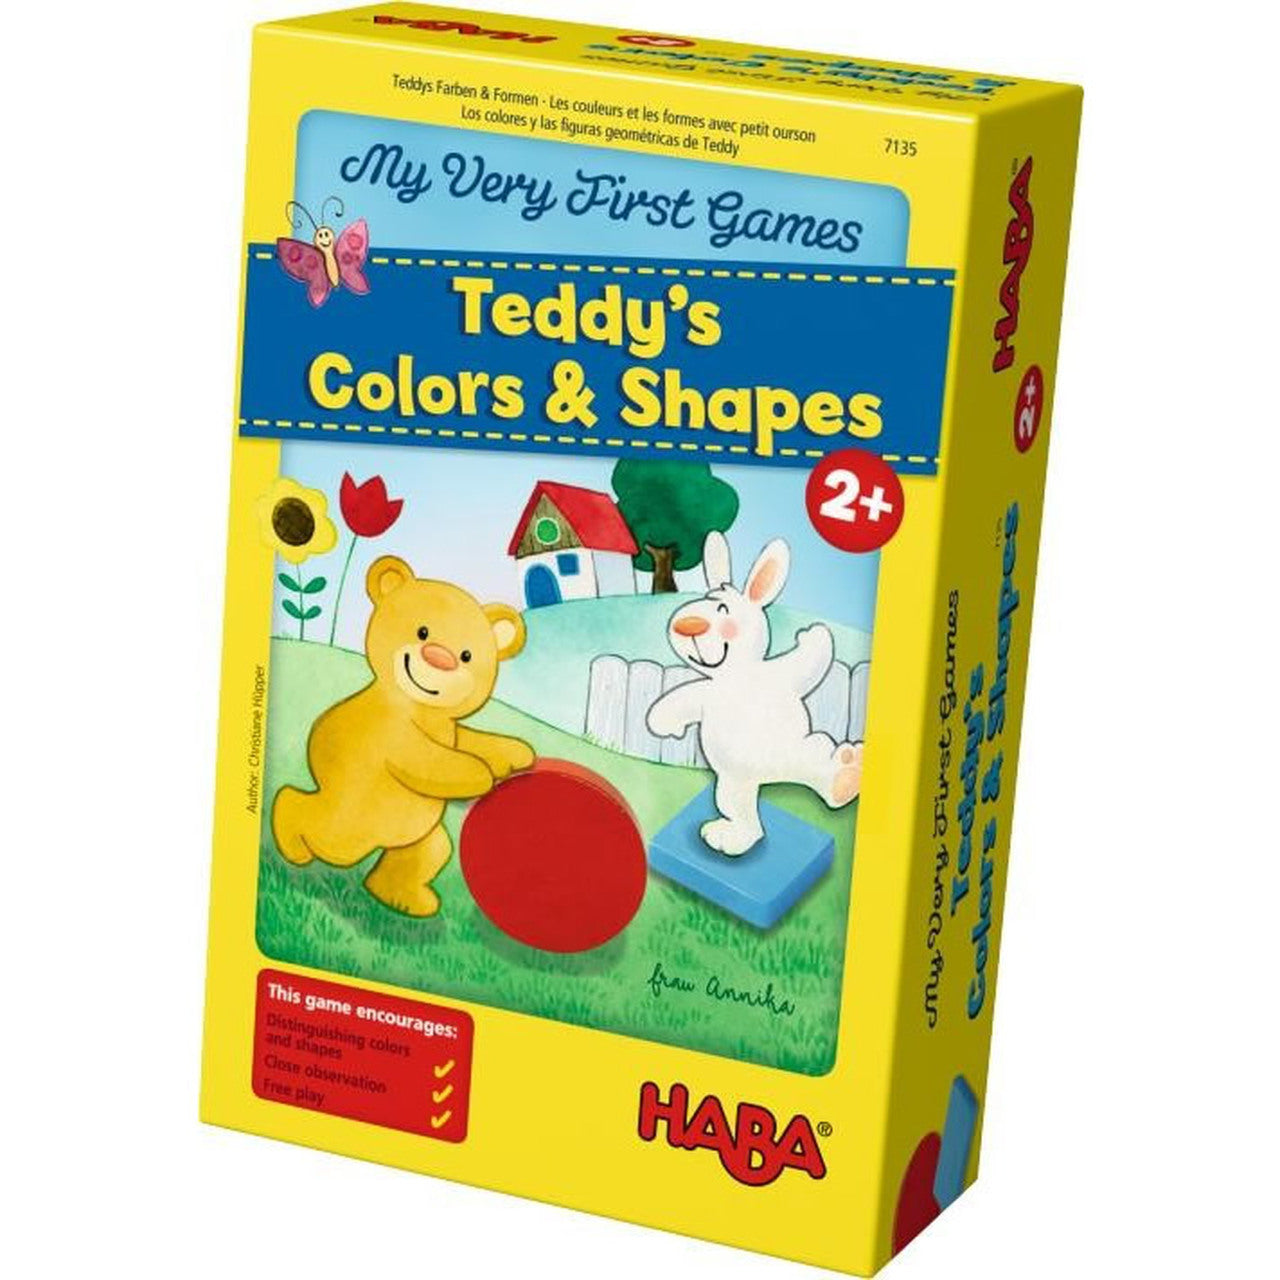 My Very First Games – Teddy’s Colors and Shapes